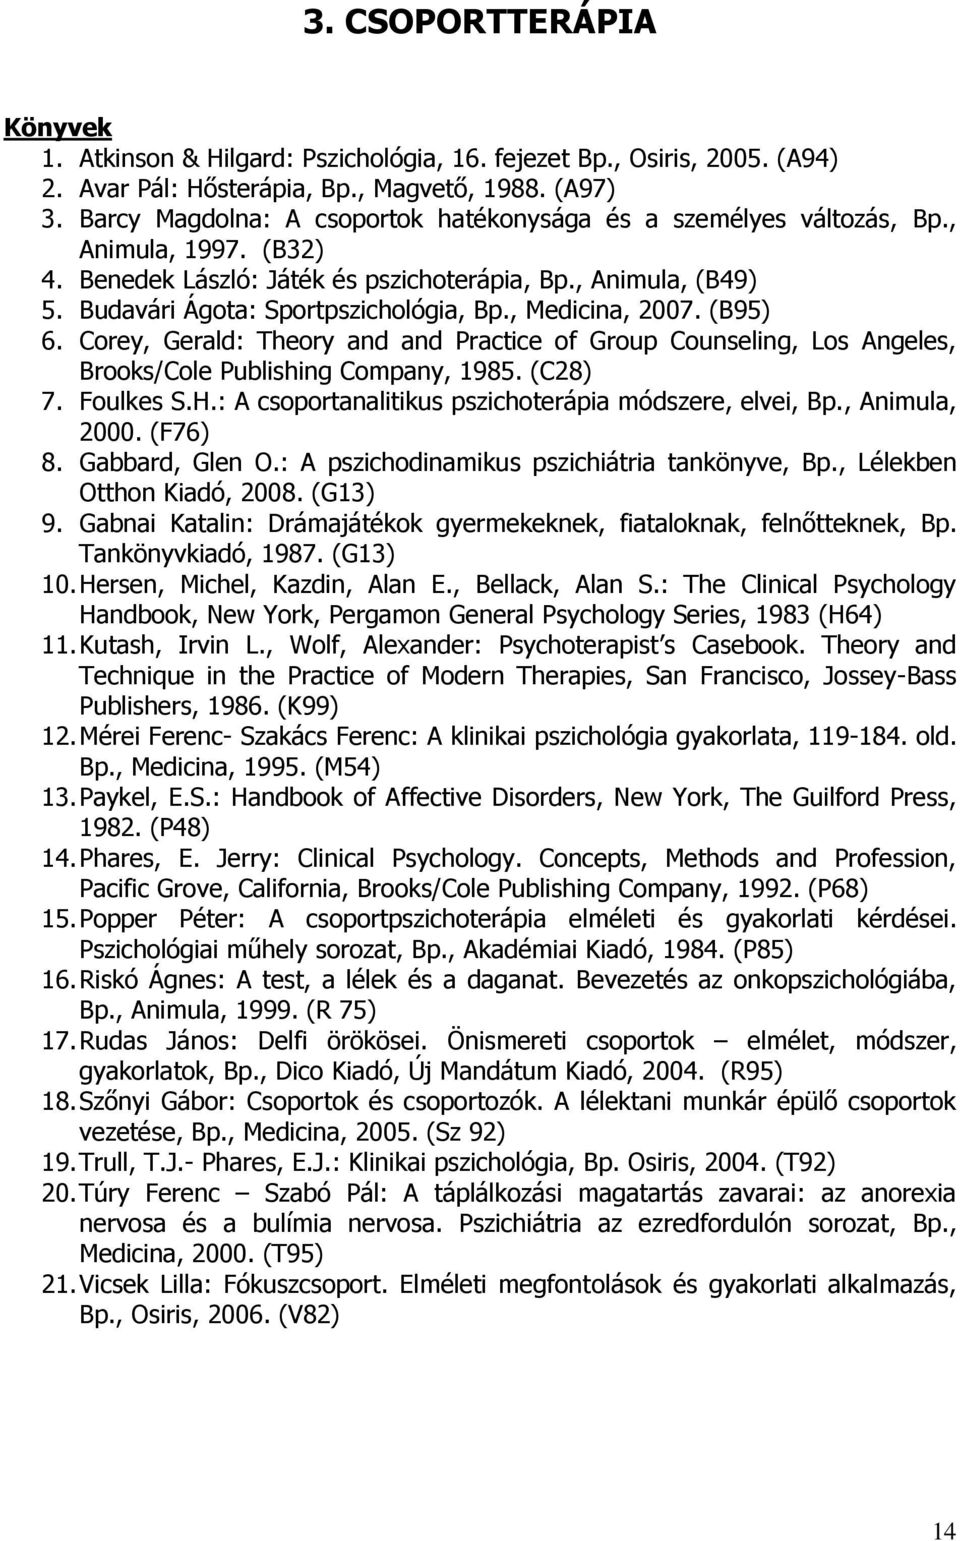 , Medicina, 2007. (B95) 6. Corey, Gerald: Theory and and Practice of Group Counseling, Los Angeles, Brooks/Cole Publishing Company, 1985. (C28) 7. Foulkes S.H.